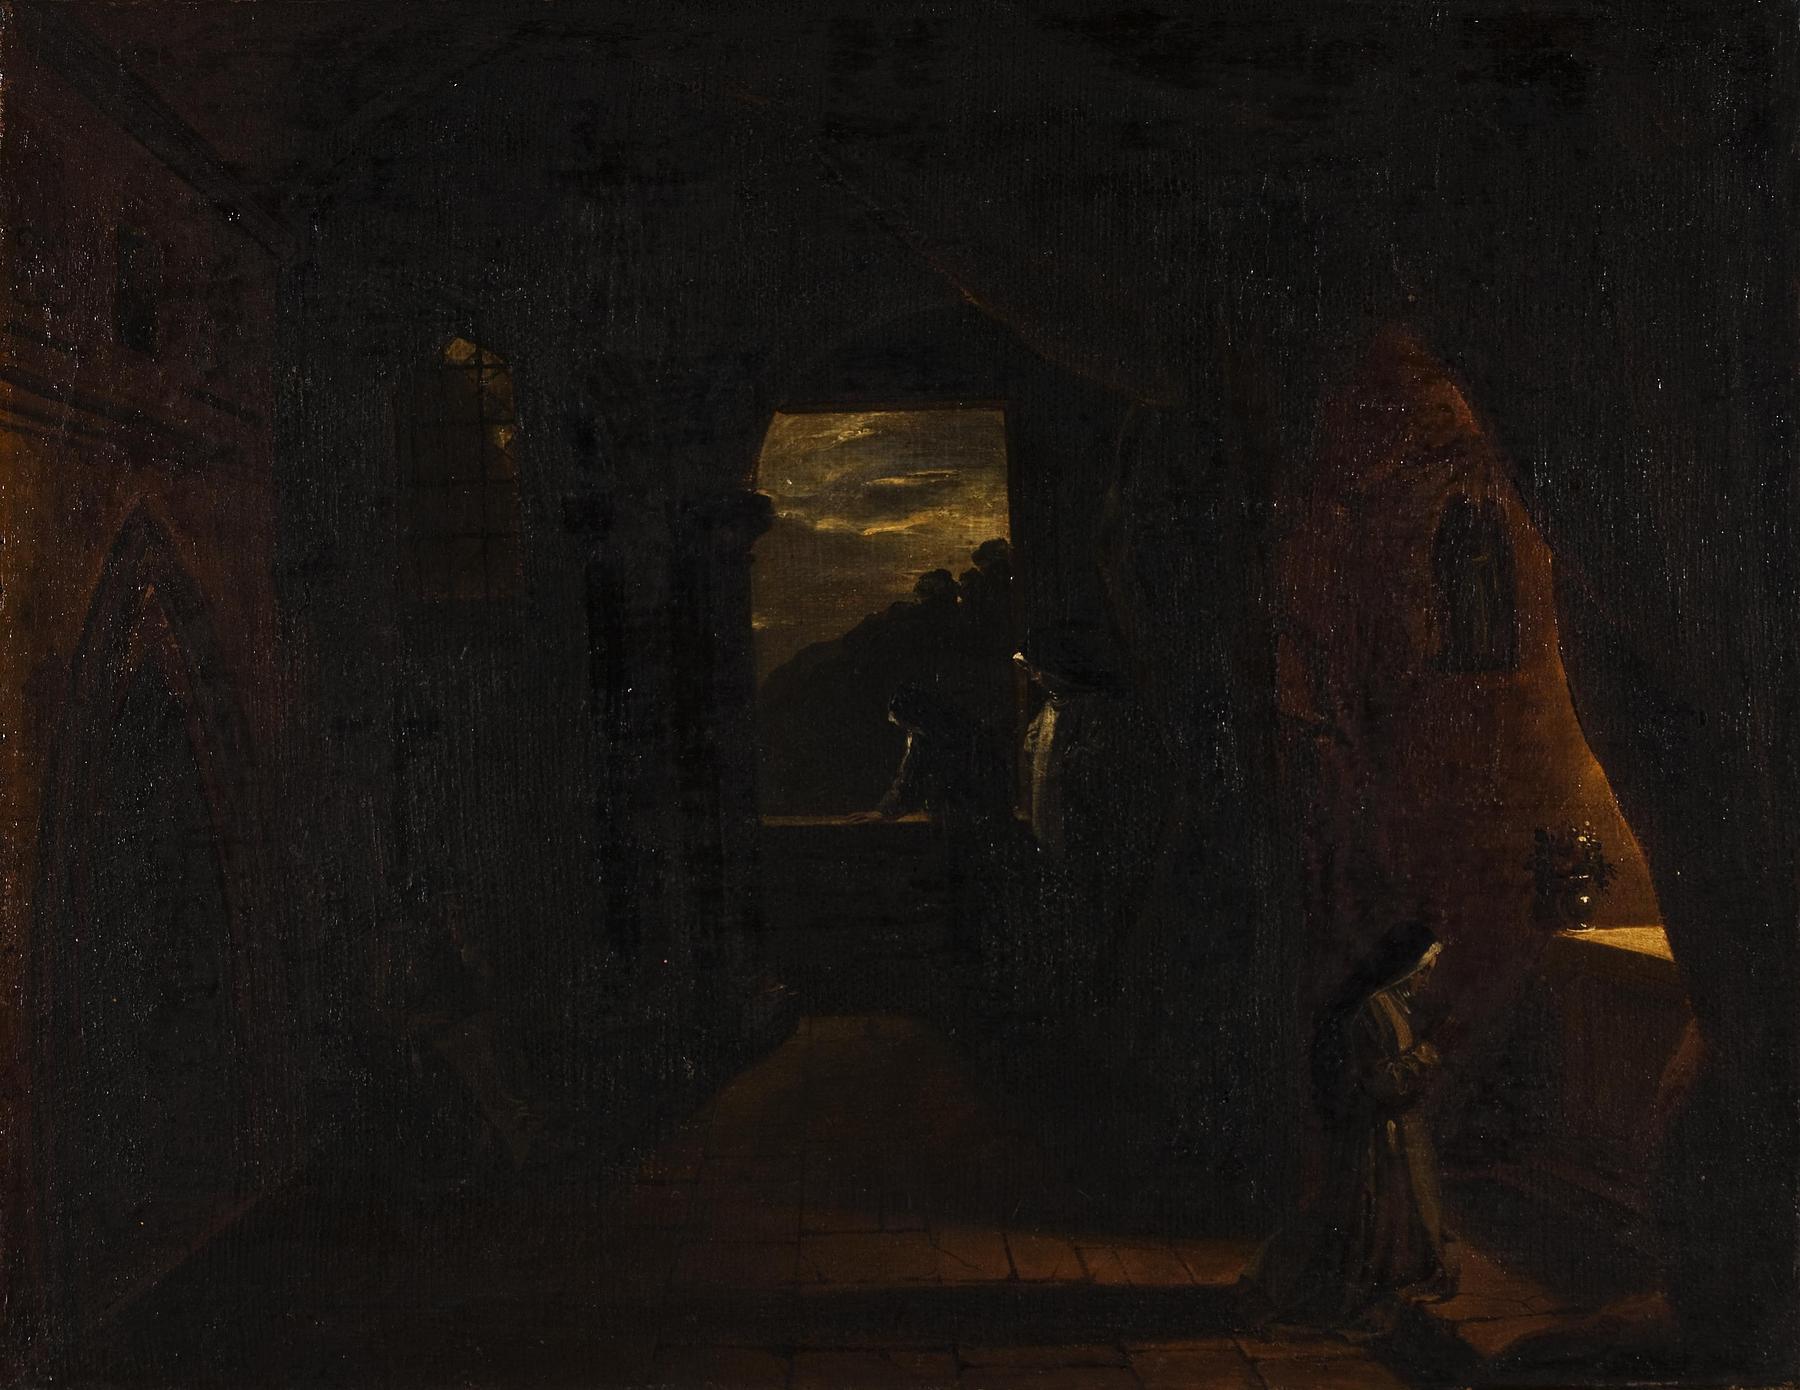 Night Scene with Nuns in a Convent, B77